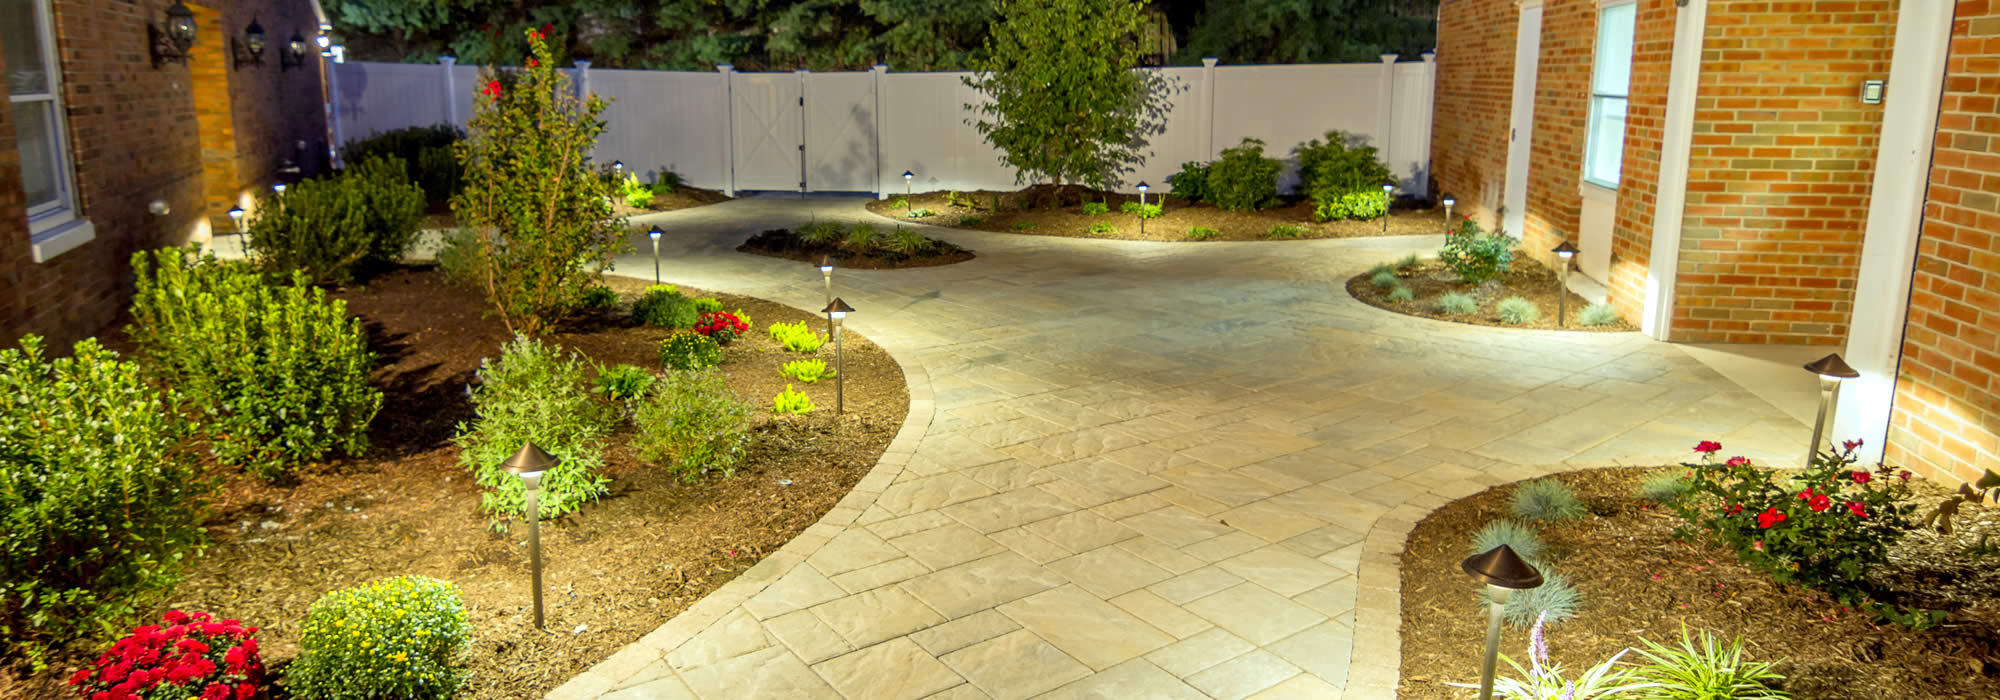 Landscaping Services in Oregon